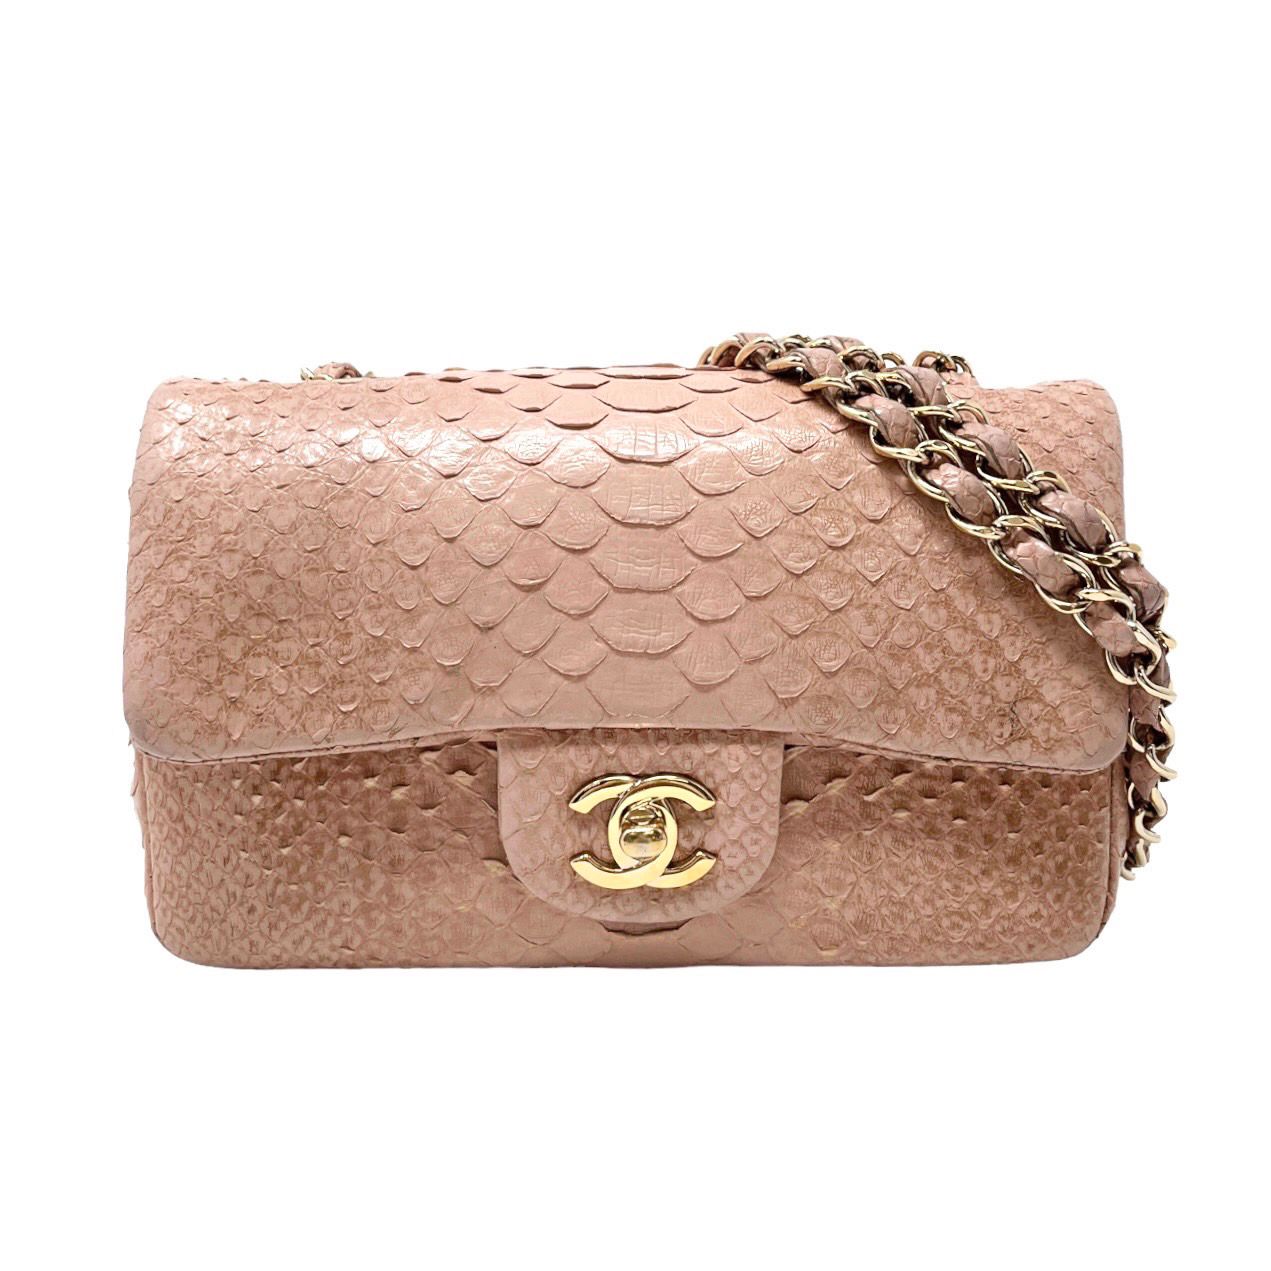 Chanel Light Pink Python Small Flap Bag . Very Good to Excellent, Lot  #58025